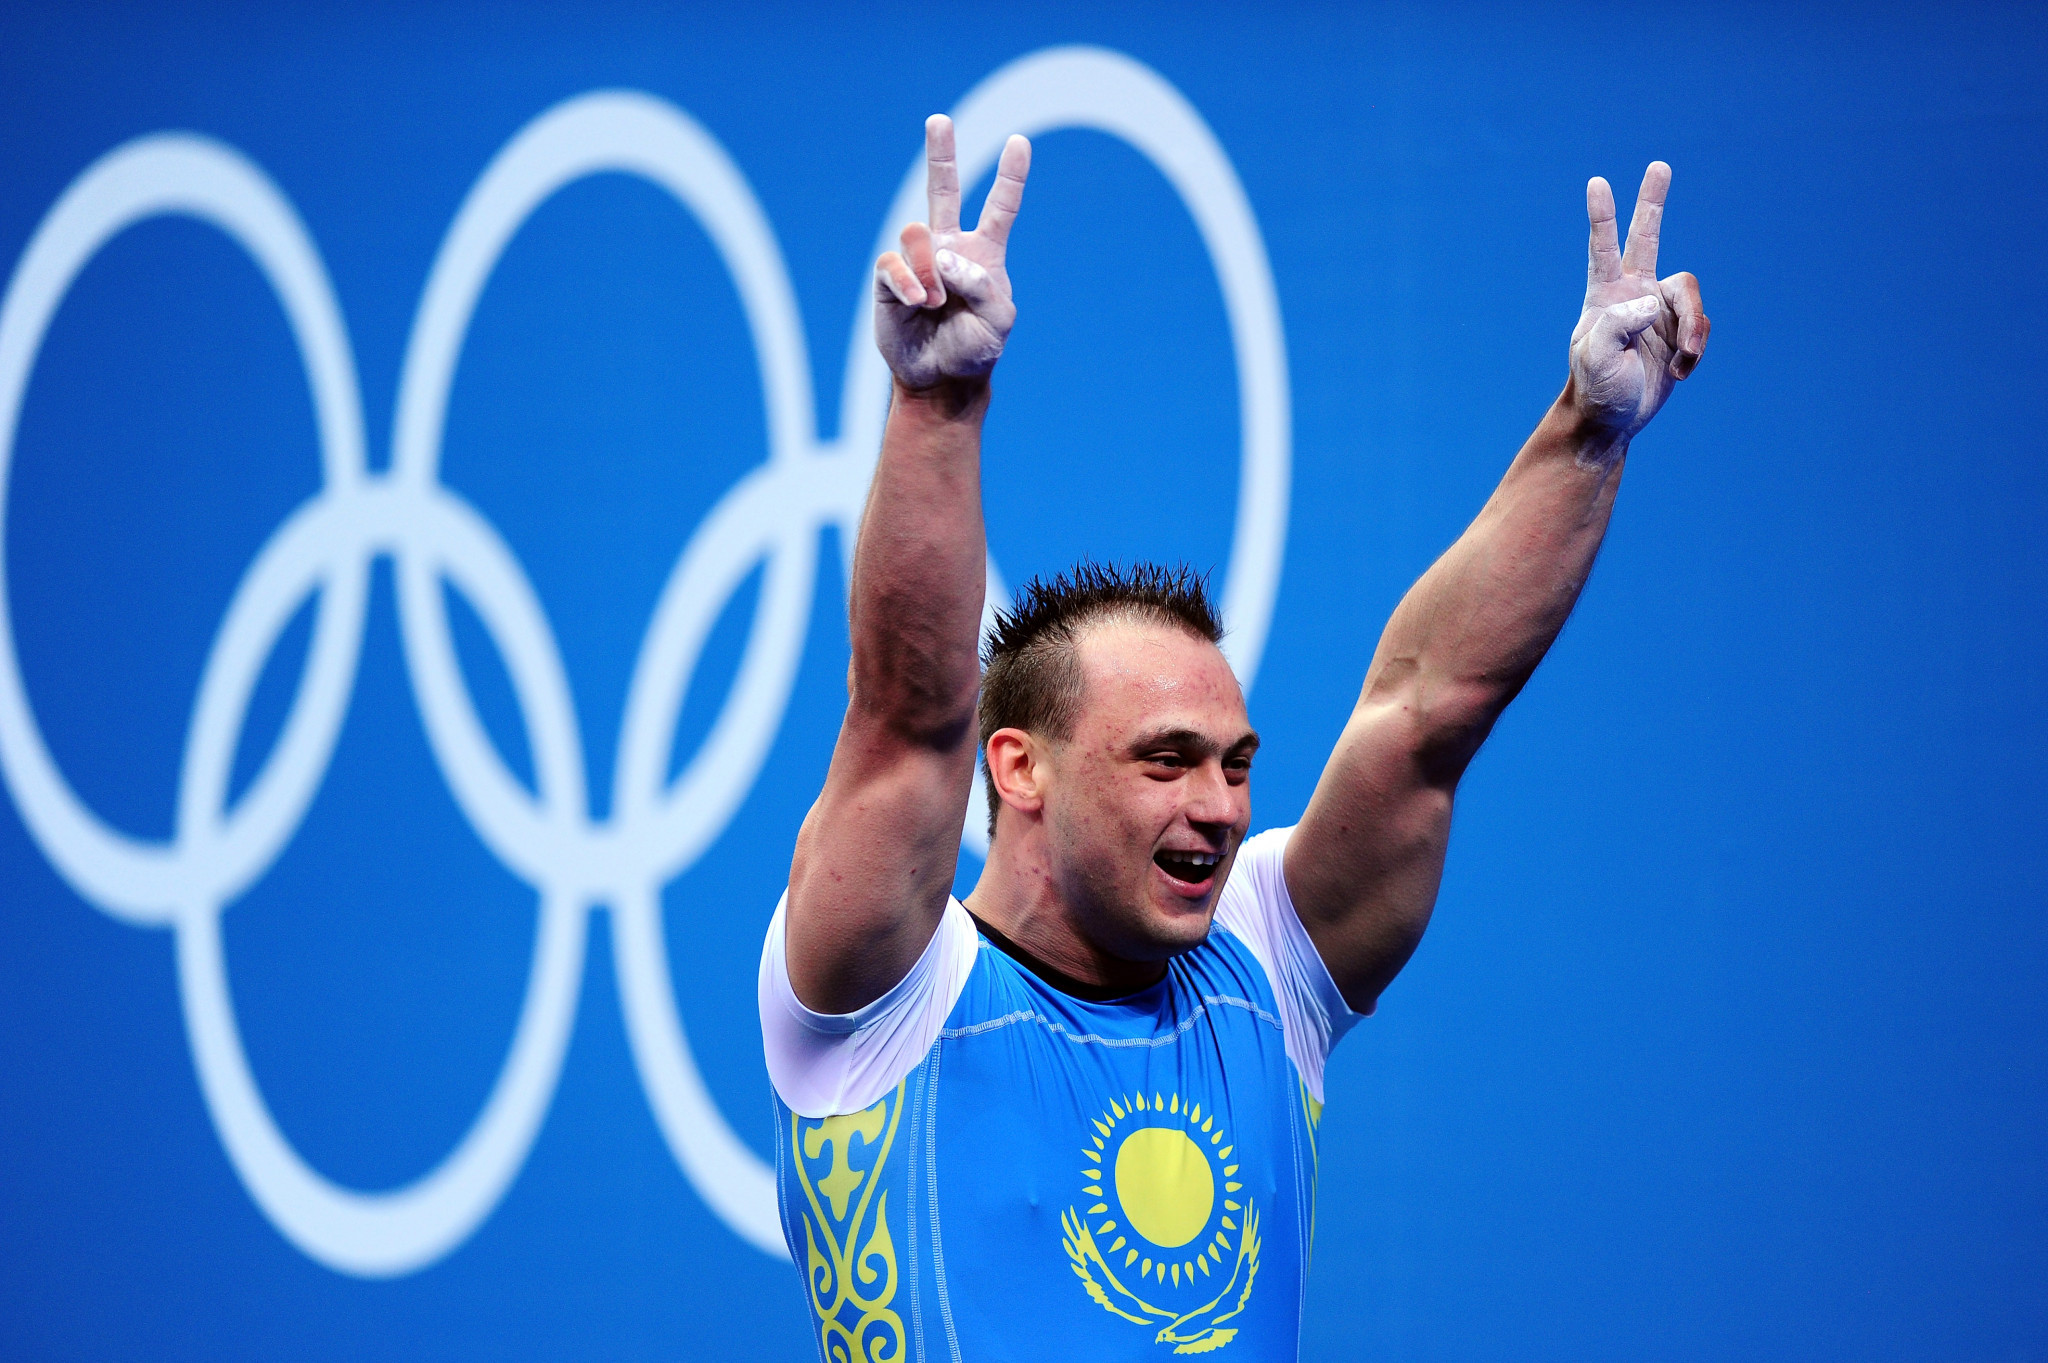 Banned weightlifter Ilya Ilyin sets sights on summer return despite two Olympic doping disqualifications